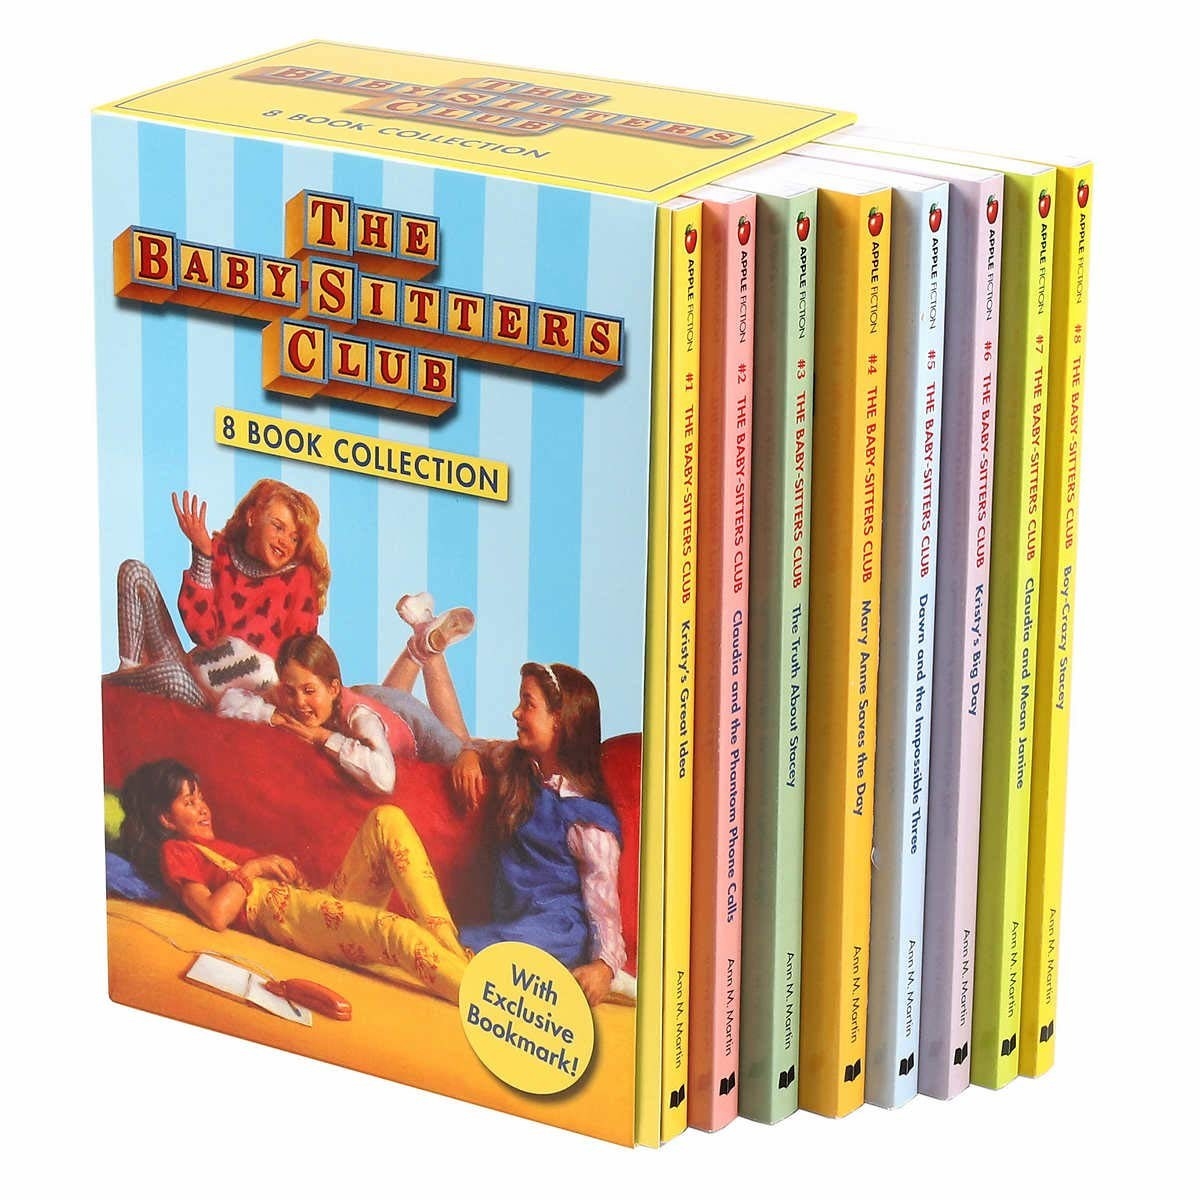 Baby-Sitters Club box set with colorful spines, cover featuring girls chatting in bedroom